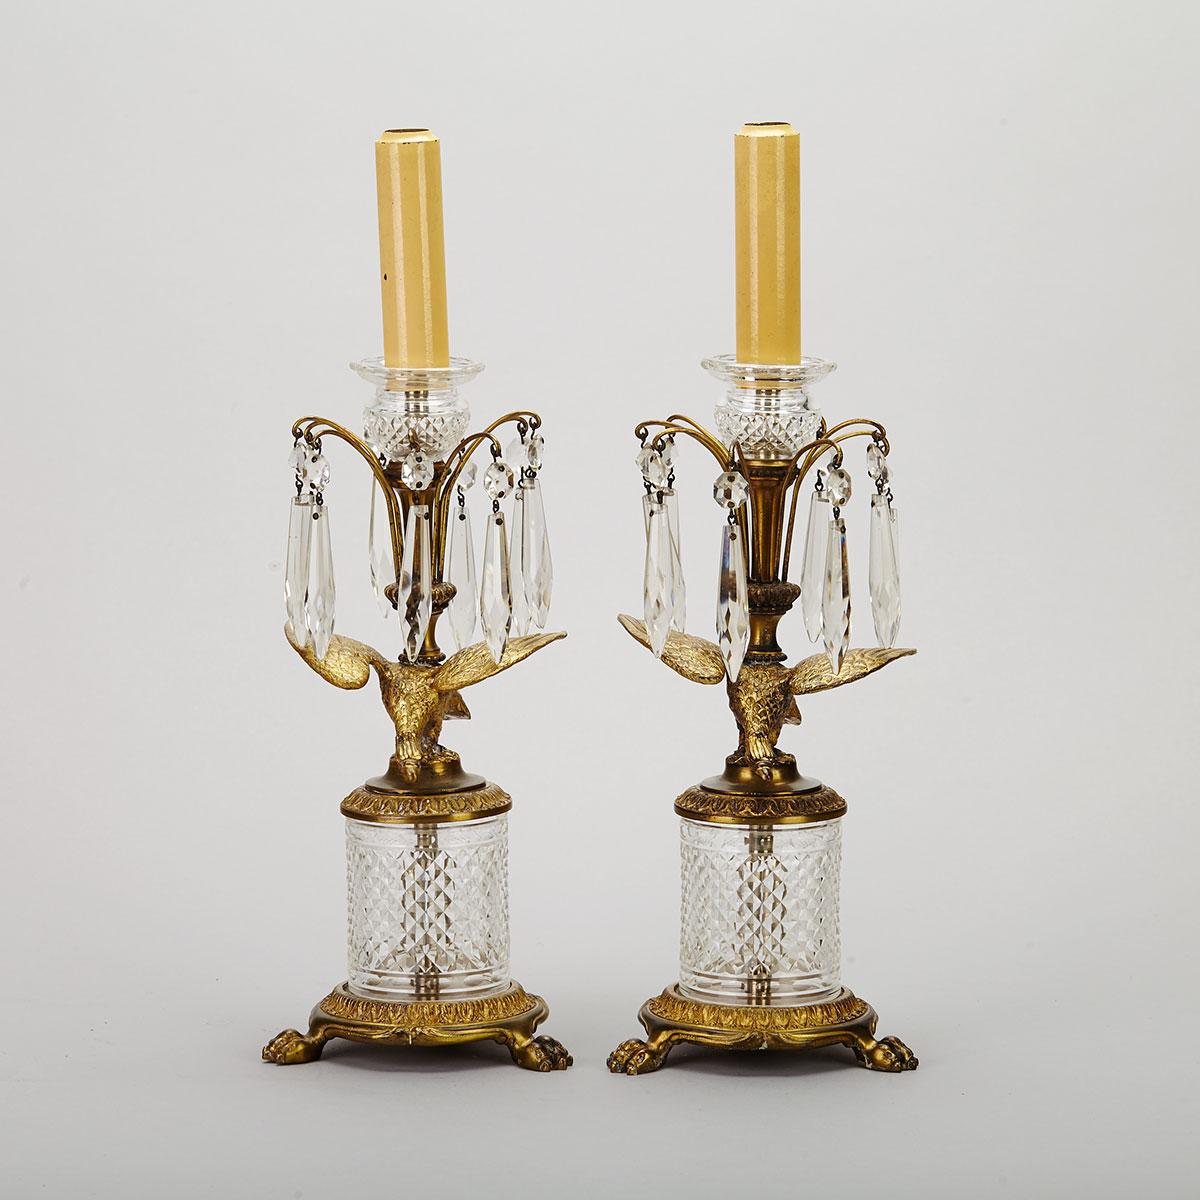 Pair of English Regency Style Cut Glass Mounted Gilt Bronze Lustres, mid 20th century